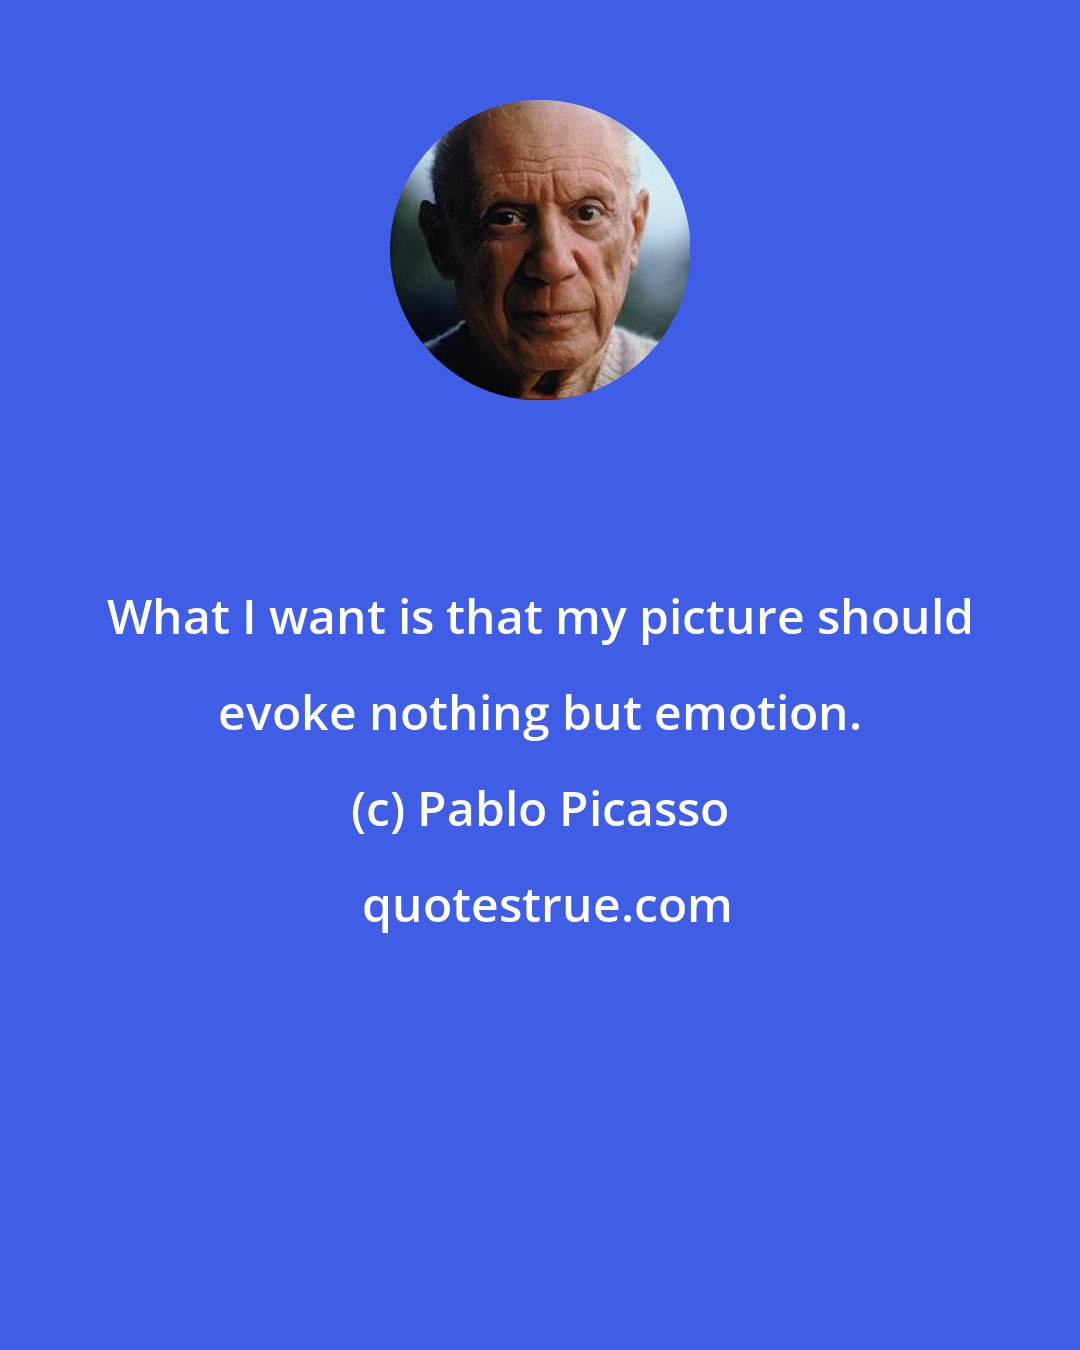 Pablo Picasso: What I want is that my picture should evoke nothing but emotion.